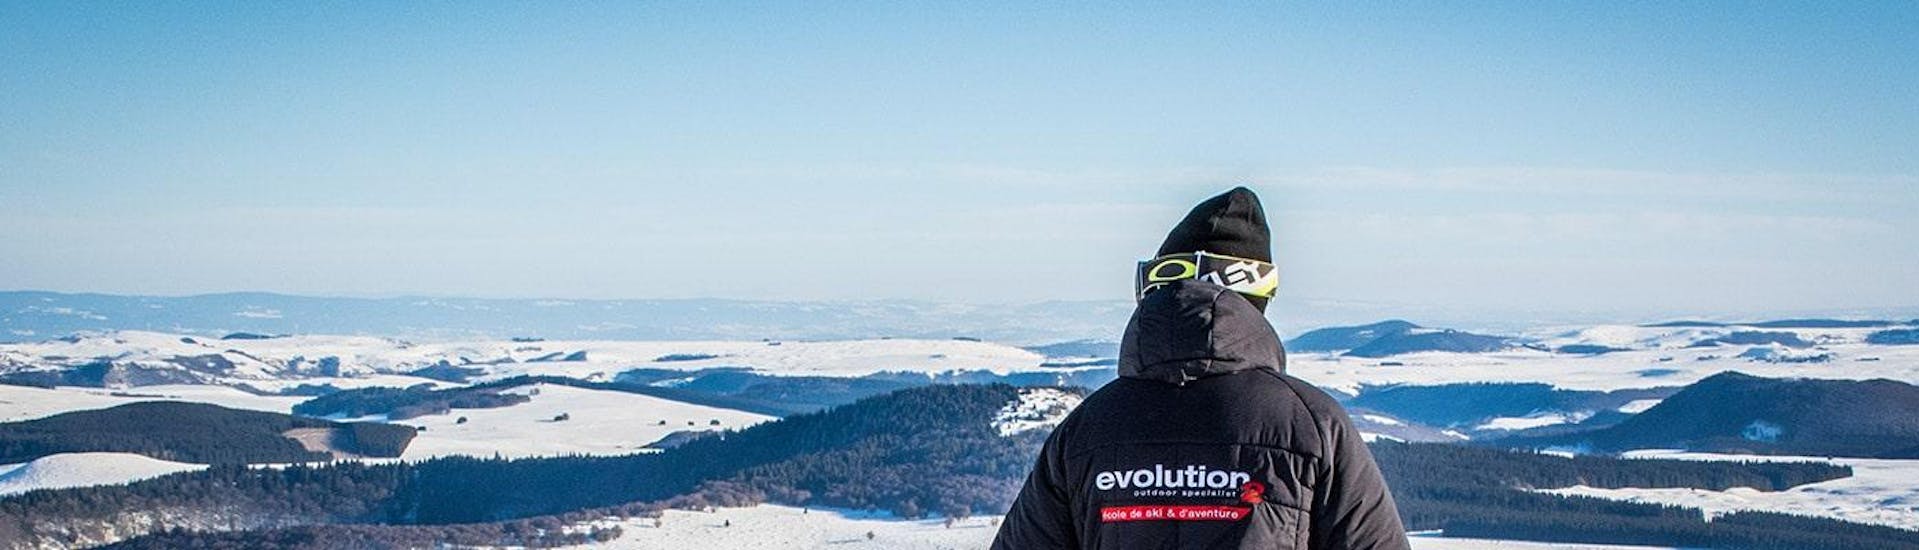 A skier is contemplating the snowy landscape at his foot during his Private Ski Lessons for Kids - All Ages with the ski school Evolution 2 Super Besse.